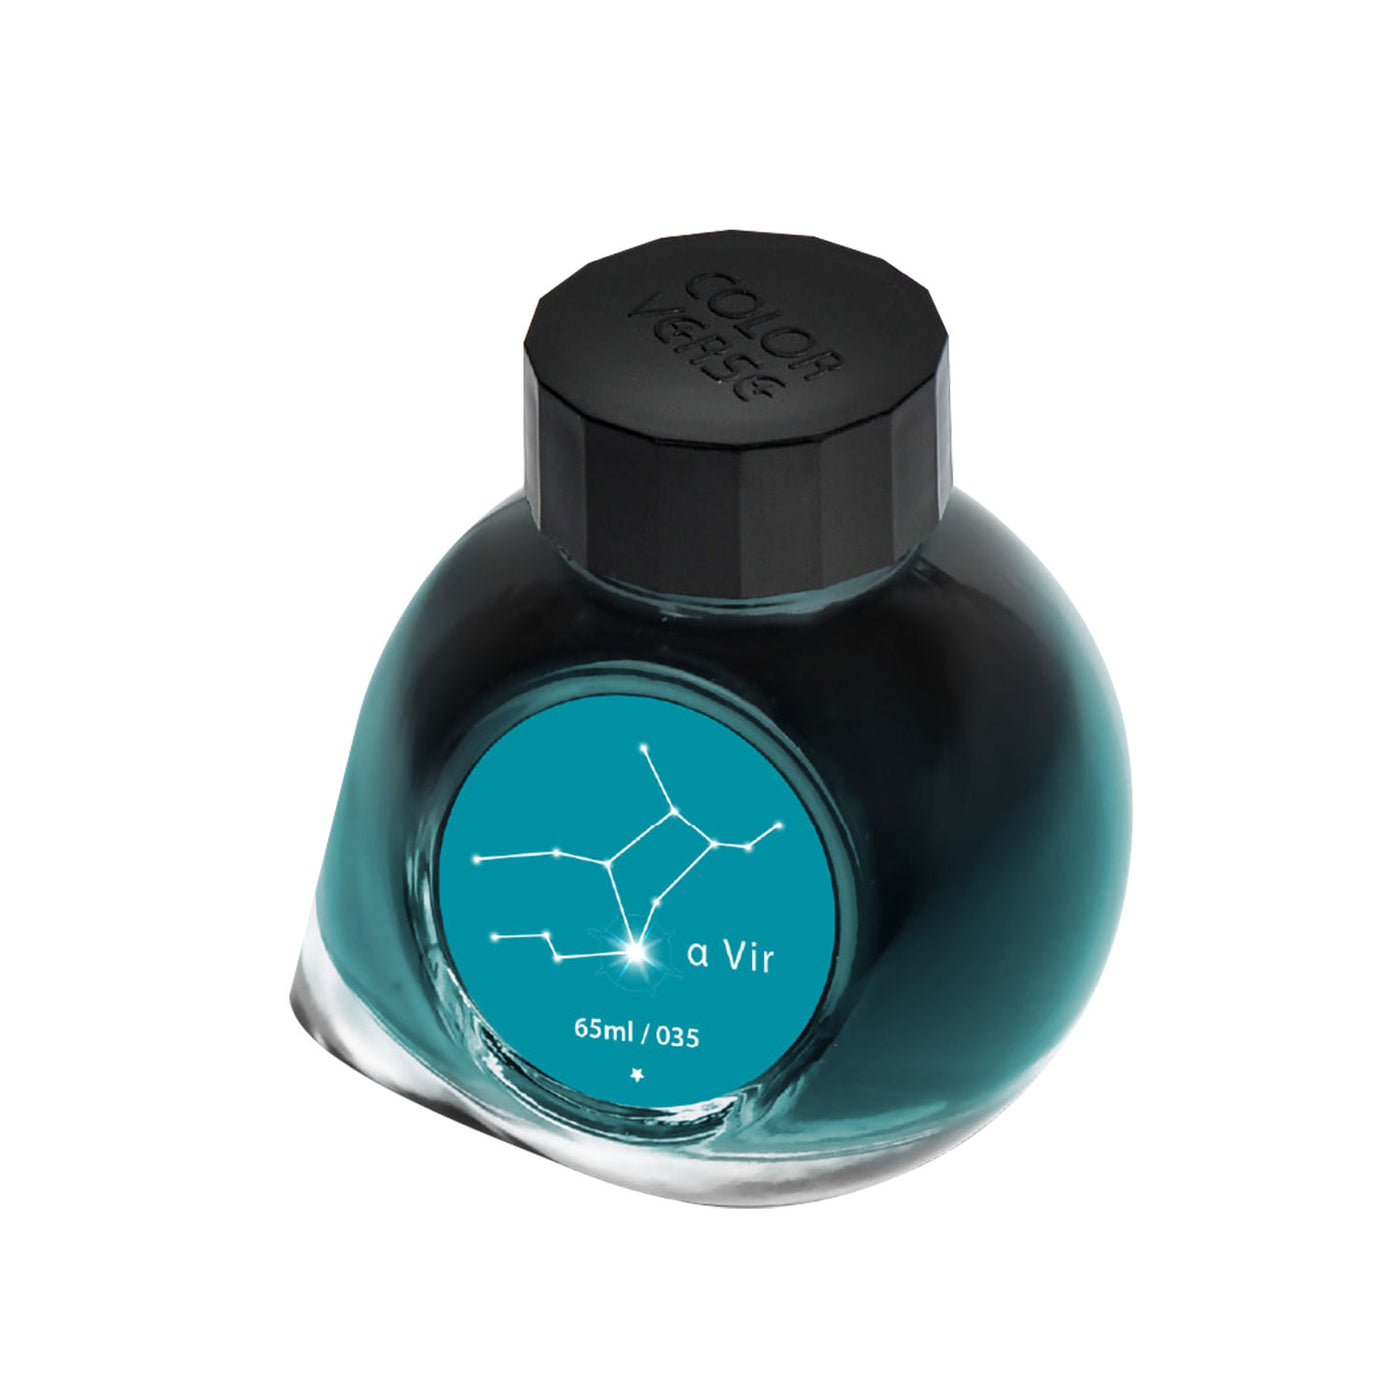 Colorverse Project Constellation II α Vir Ink Bottle Turquoise - 65ml 1